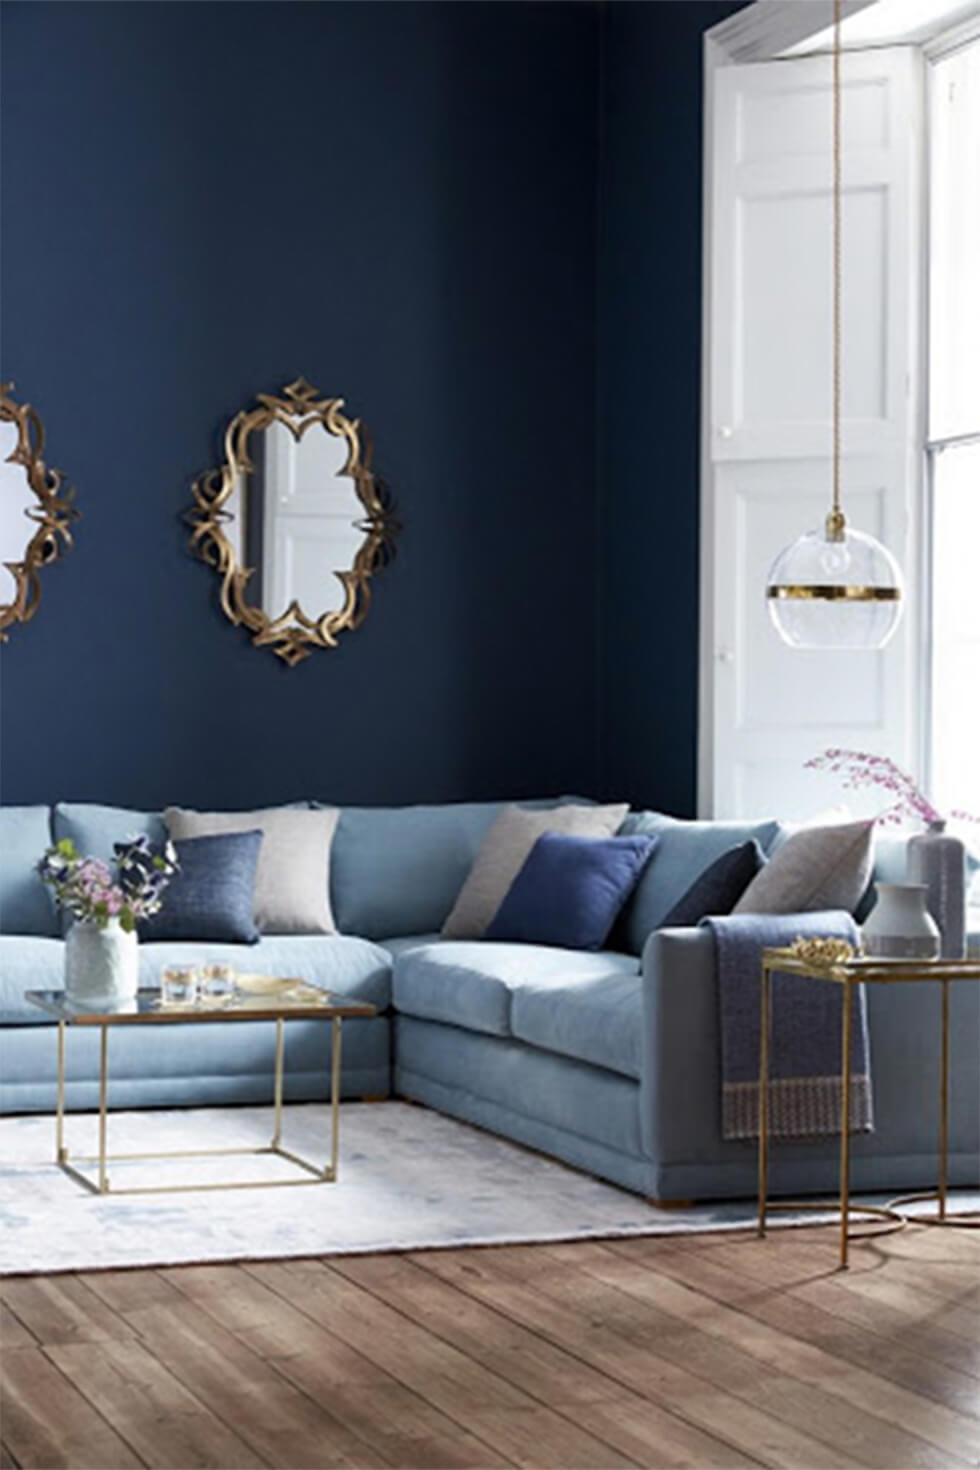 Light blue corner sofa in a cosy living room with navy walls.